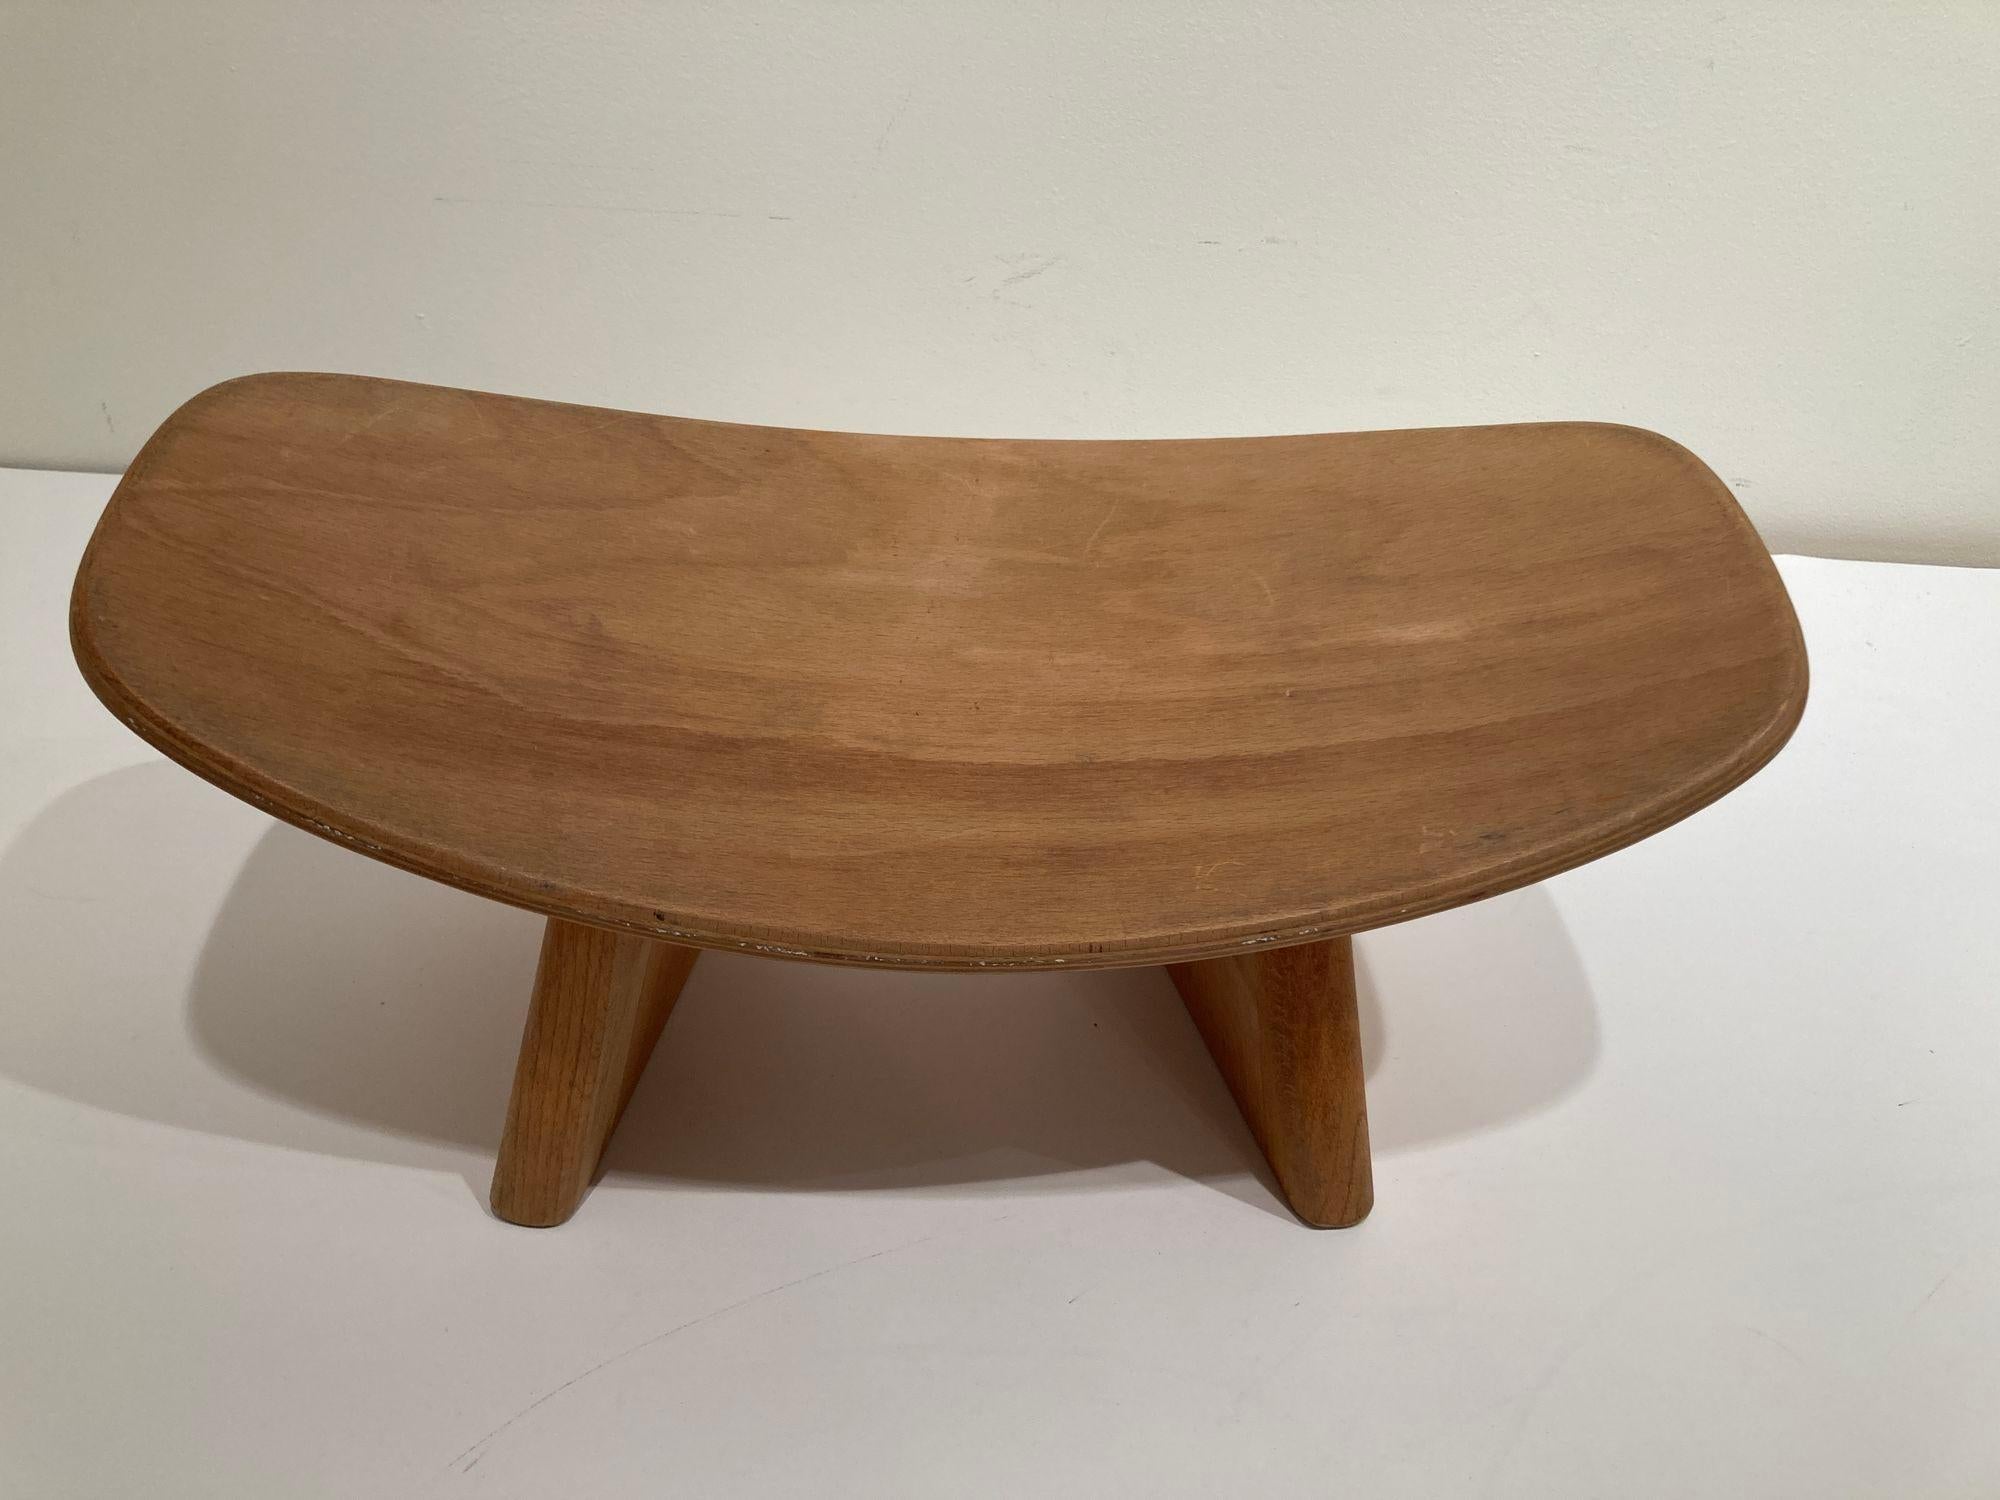 French meditation wood Shoggi stool by Alain Gaubert, Beechwood, 1980s.
Shoggi stool, tabouret by Alain Gaubert, created in 1950's in France.
Made from Beechwood woth a smooth, organic form.
Created and signed by Alain Gaubert in 1980, very pure